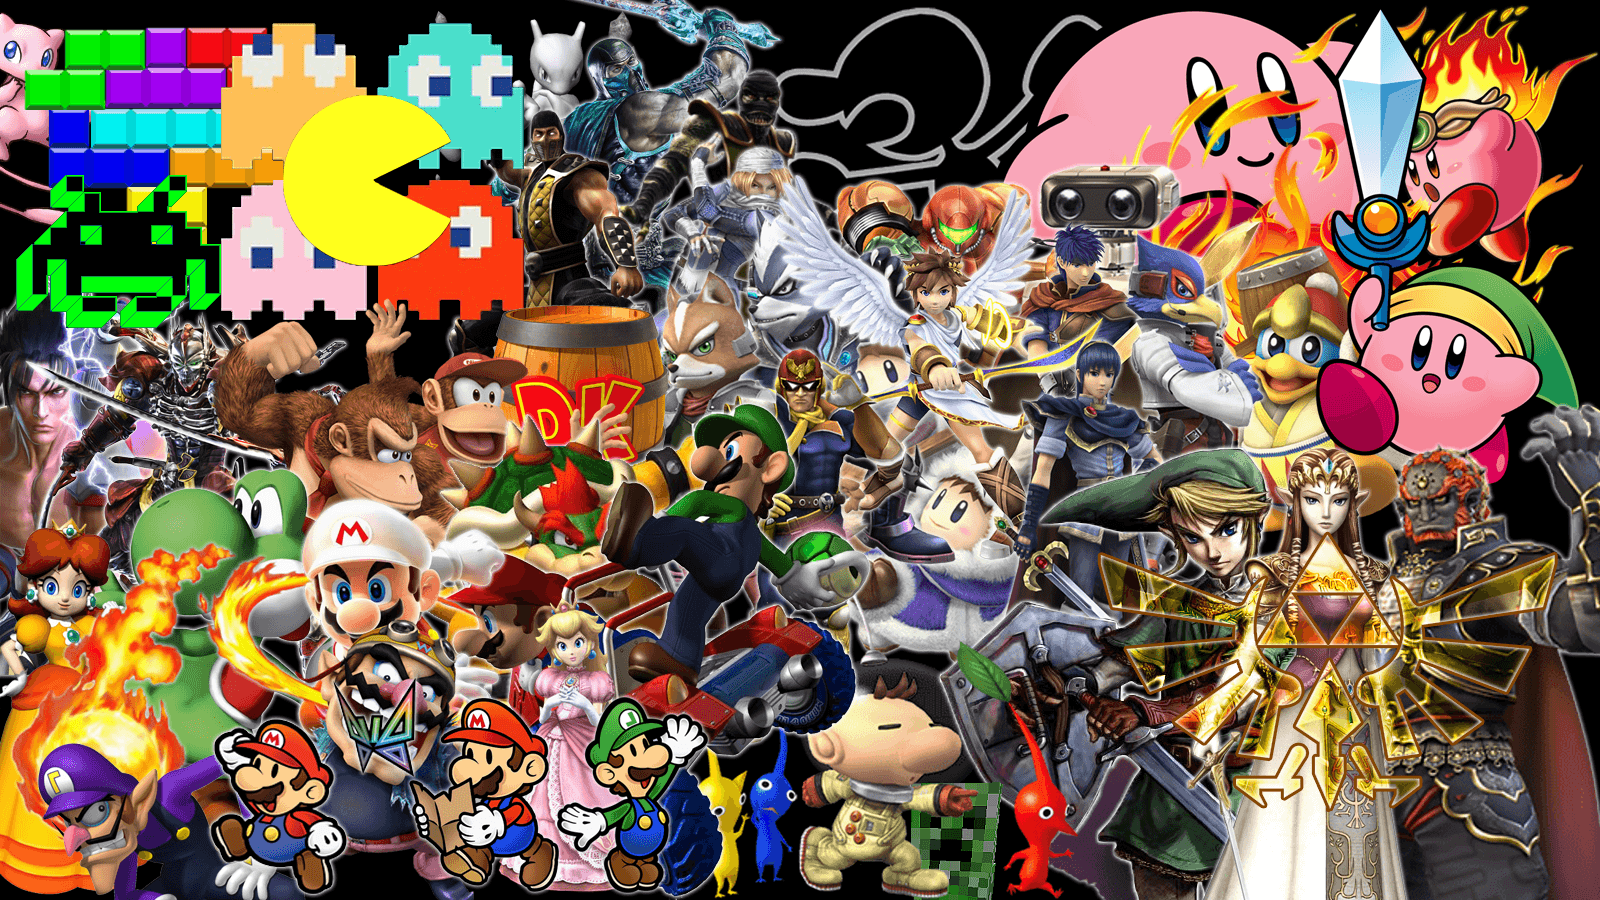 Wanted a cool desktop background that I could incorporate my gaming Icons.  So I made one : r/gaming